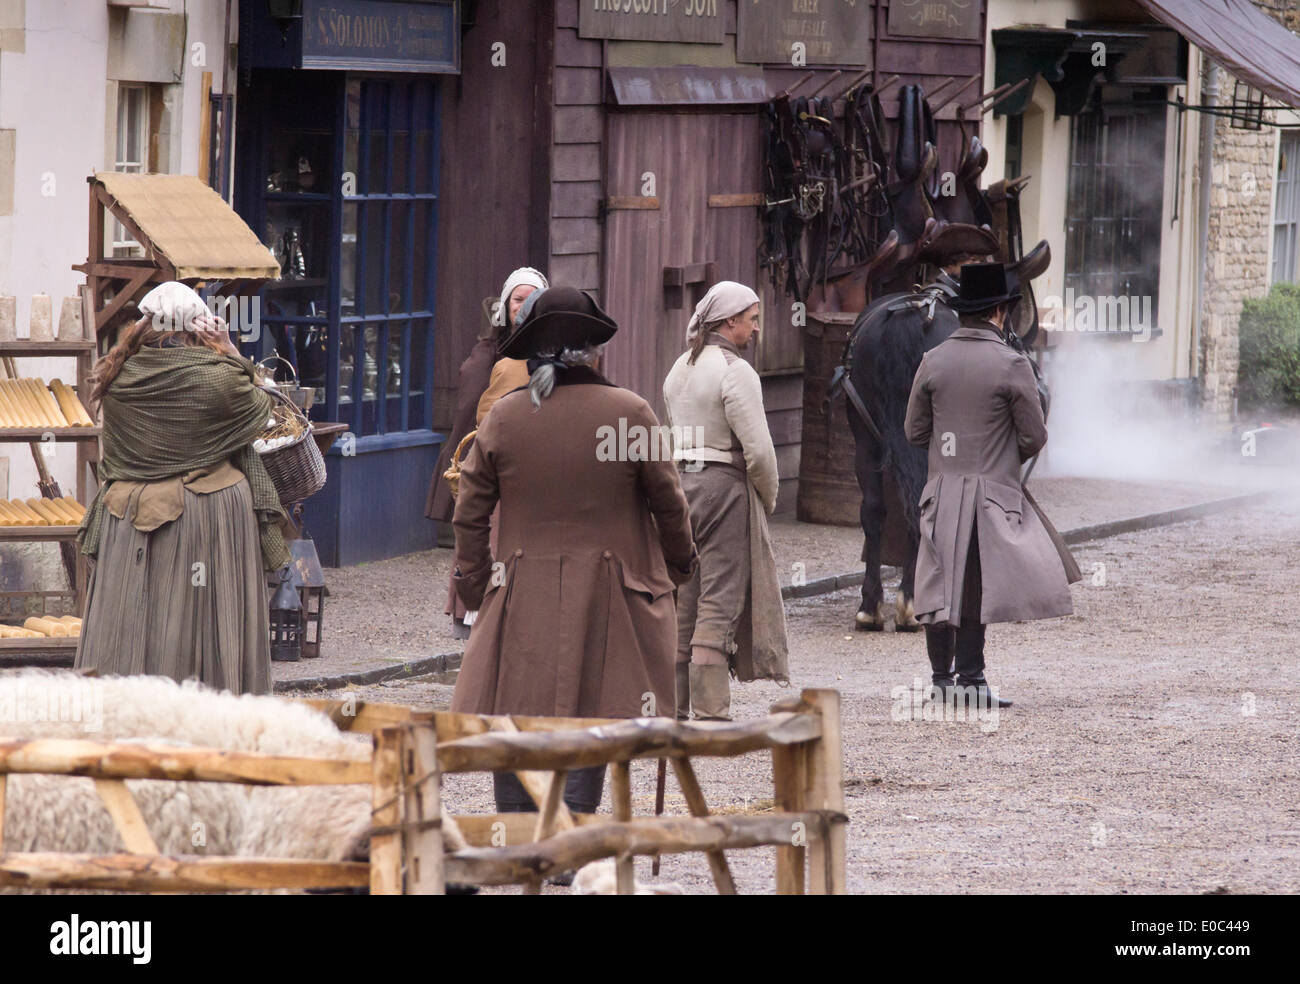 Corsham Wiltshire 6th May 2014  Filming the BBC drama Poldark on location in Corsham Wiltshire. The BBC have taken over this small country town to remake their hit 1970's drama based upon the works of Winston Graham. Credit:  Mr Standfast/Alamy Live News Stock Photo